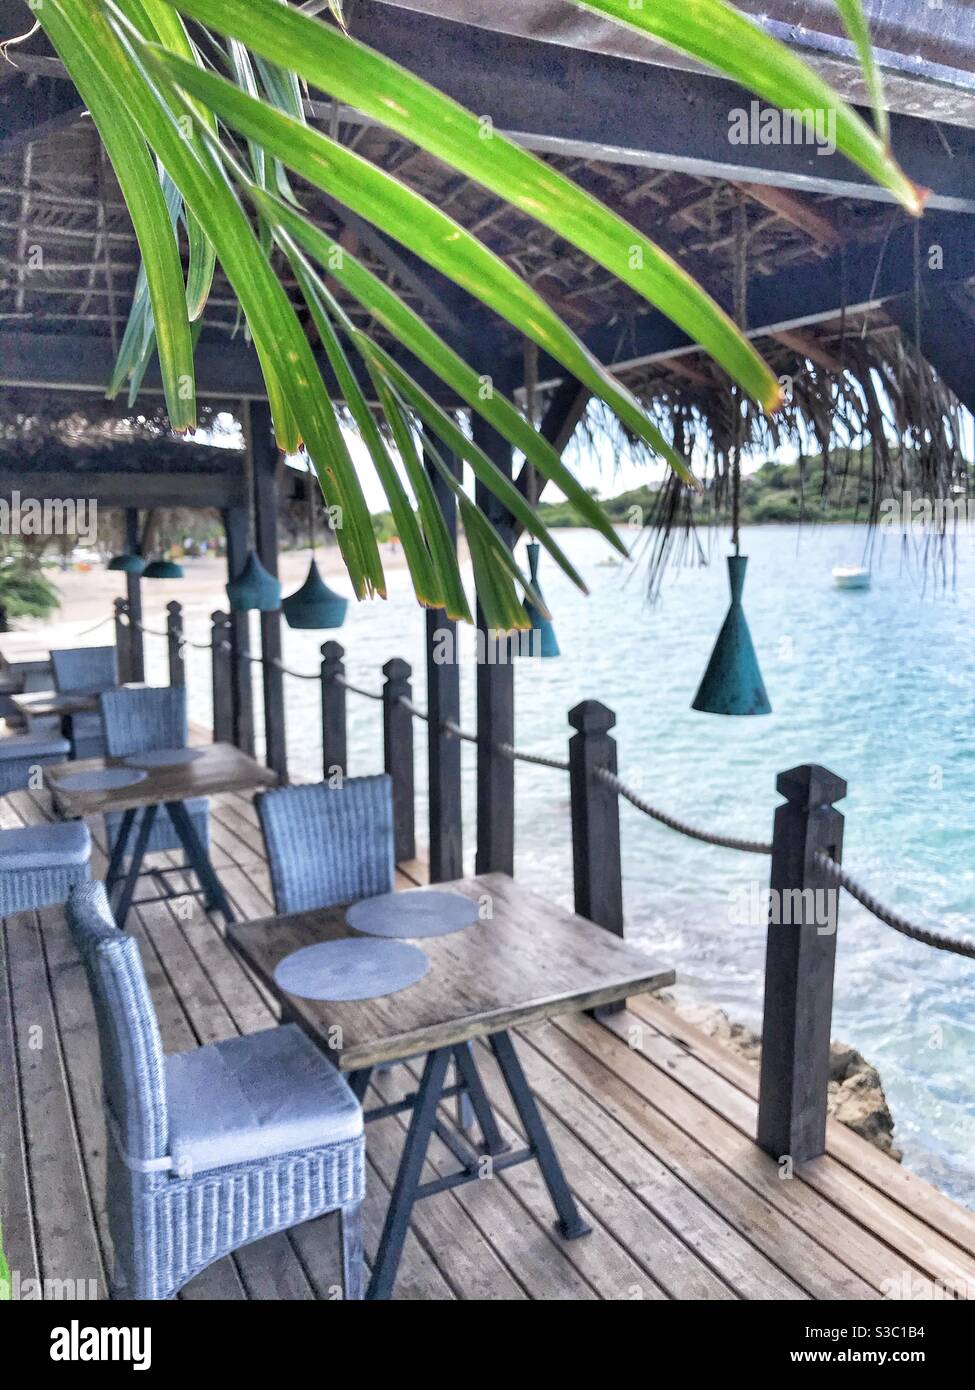 Sheer Rocks Restaurant In Antigua overlooking the Caribbean Sea all set ready for opening - showing the tables and chairs Stock Photo